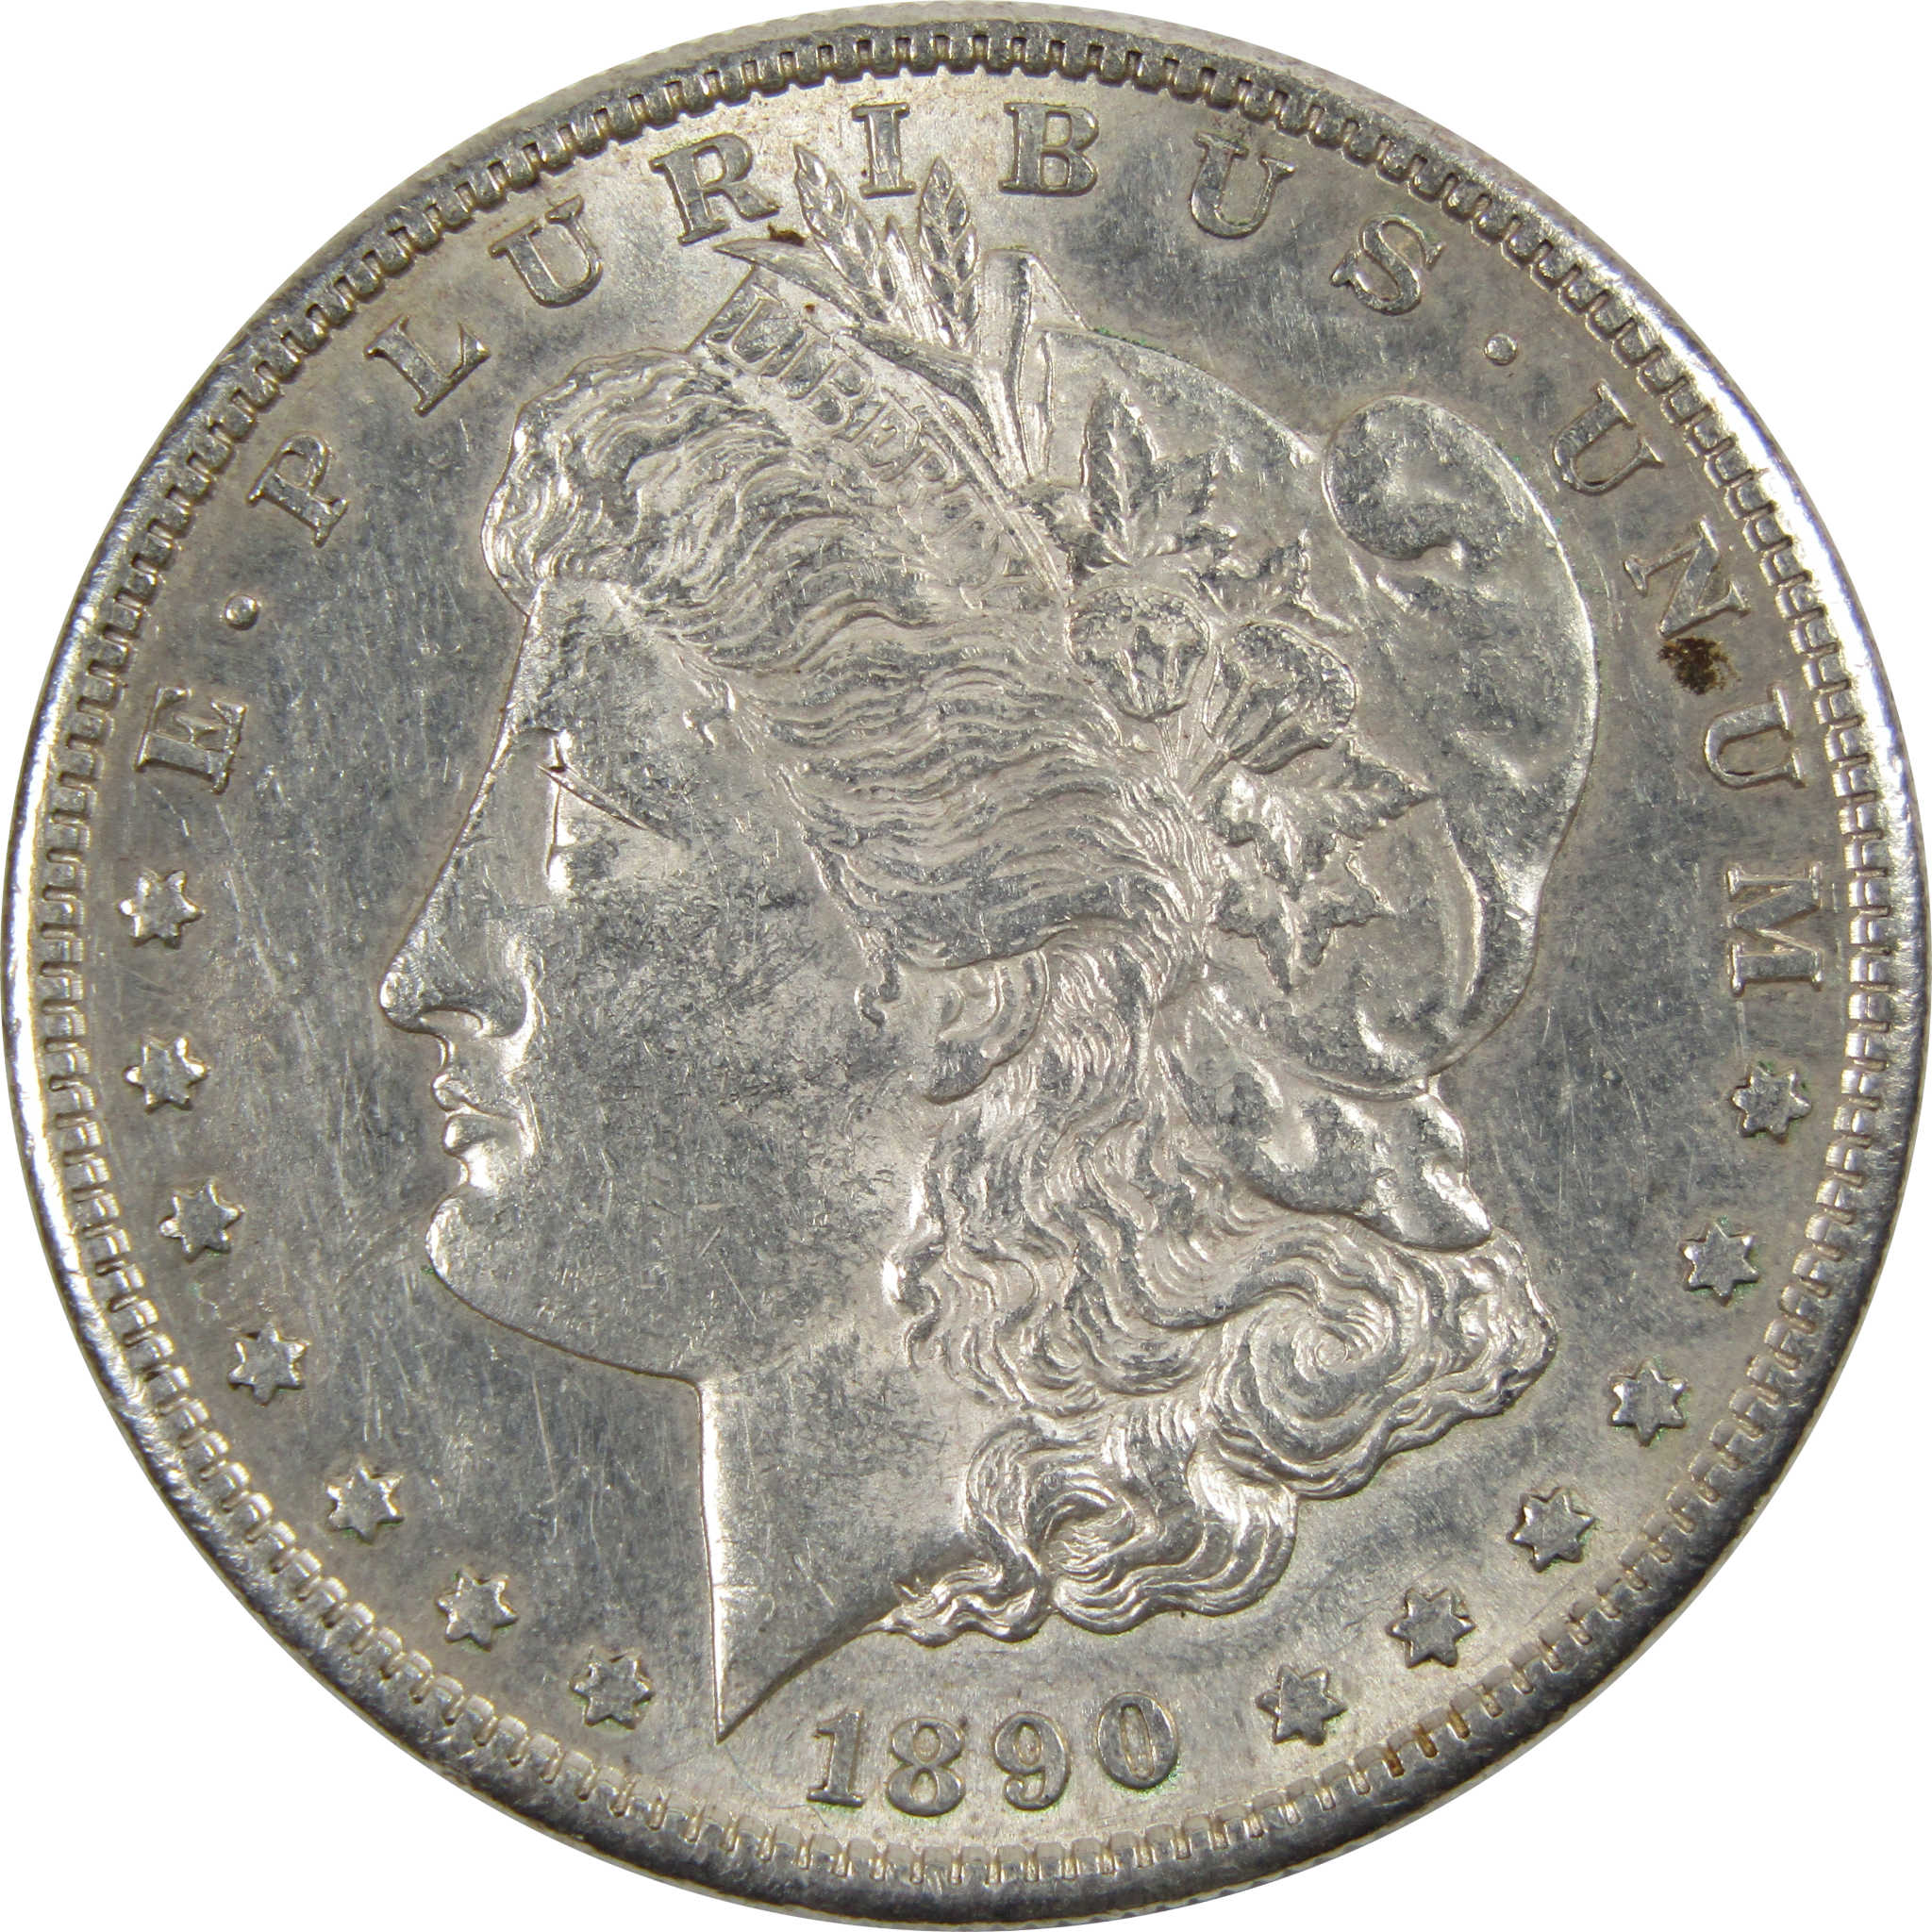 1890 S Morgan Dollar AU About Uncirculated 90% Silver SKU:I8192 - Morgan coin - Morgan silver dollar - Morgan silver dollar for sale - Profile Coins &amp; Collectibles